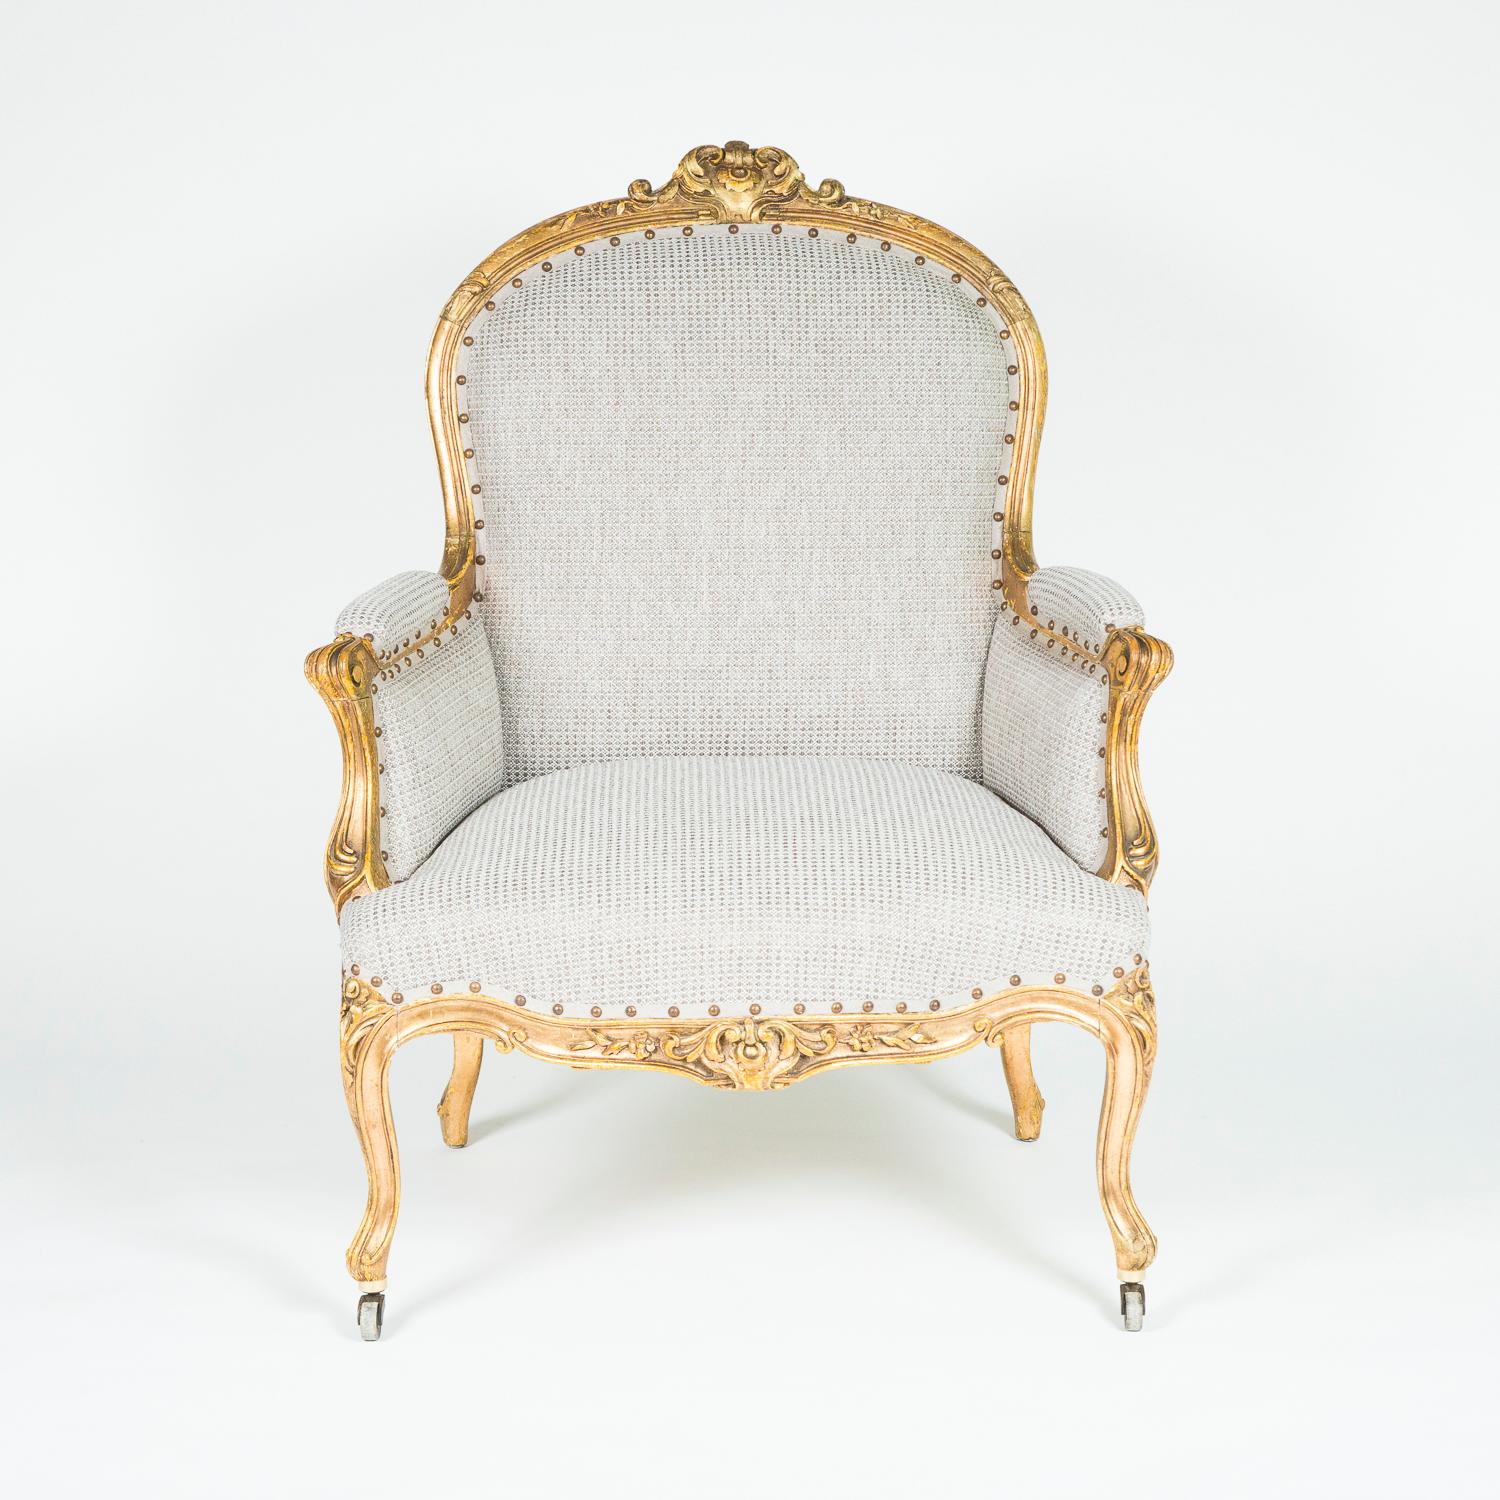 A pair of Louis XV style giltwood bergère armchairs with cabriole legs, upholstered seat, back and arm rests, the front feet on castors.

Recently re-upholstered.
     